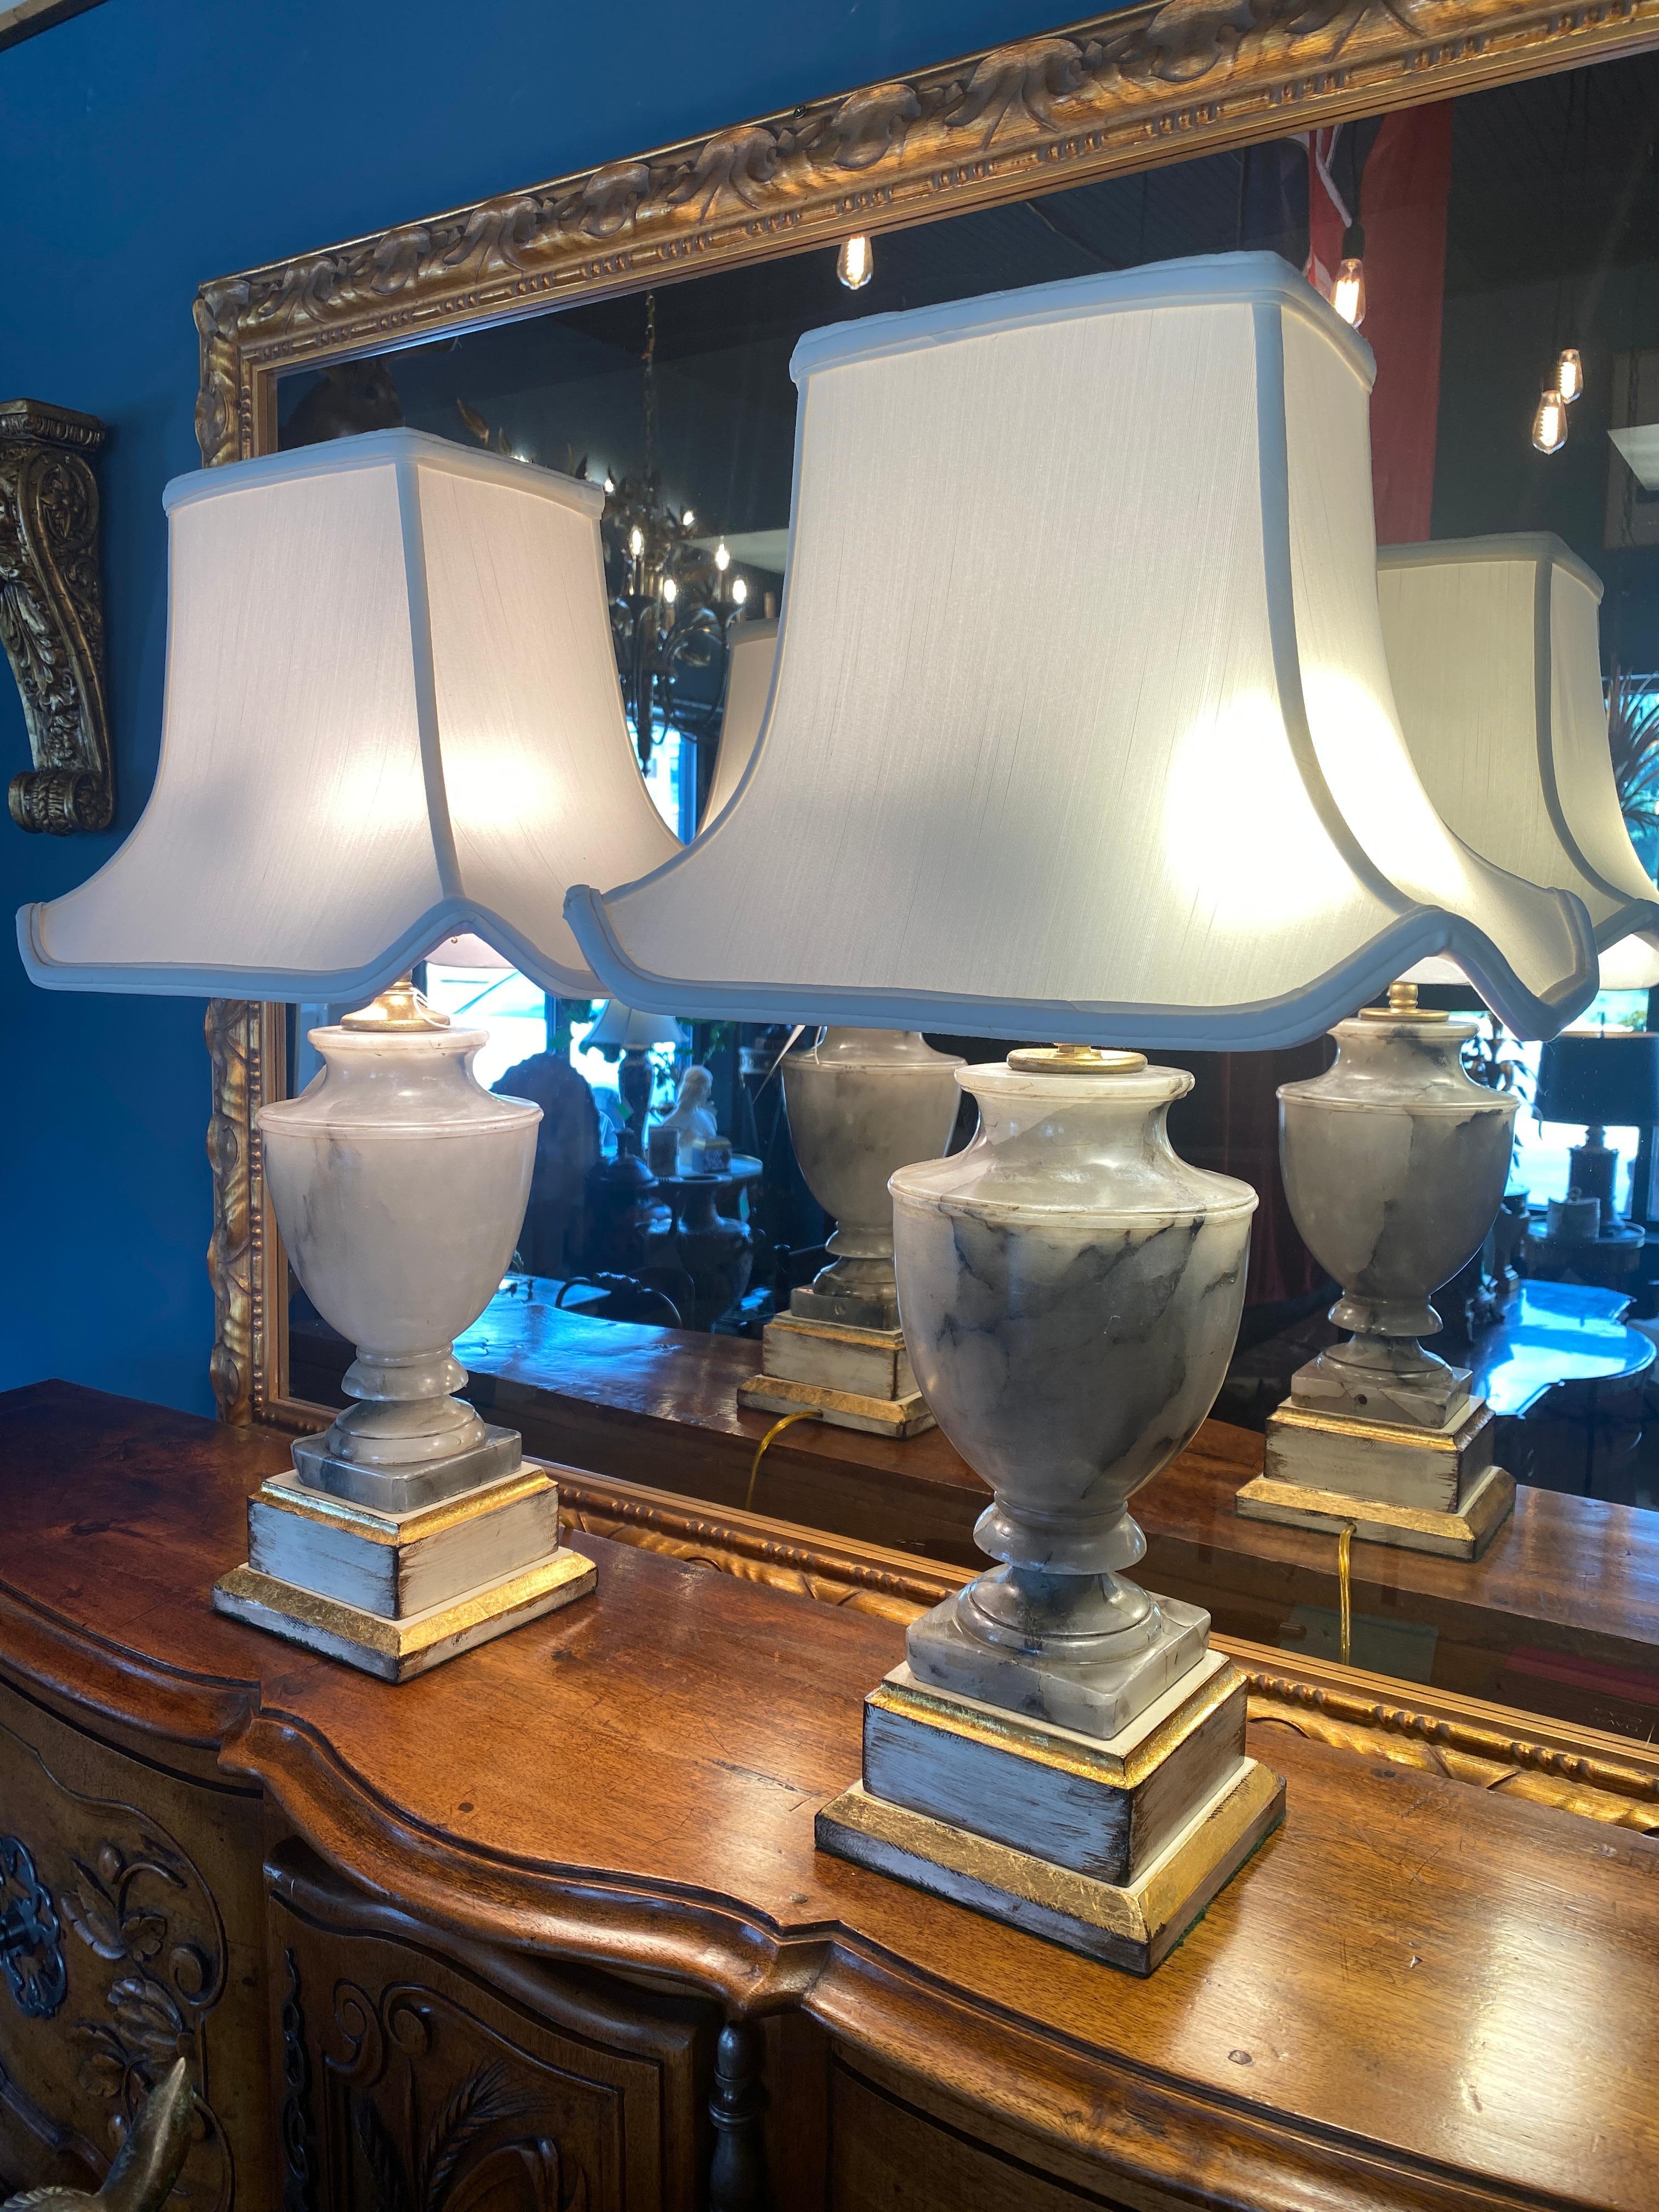 A pair of carved Oynx Urn form lamps mounted on lacquer and gilded Mahogany bases, new wiring. Pagoda lamp shades. Two horizontal sockets with pull cords in each lamp. Brass posts and finials. Bases are lined with felt on the bottoms. 

Measures: